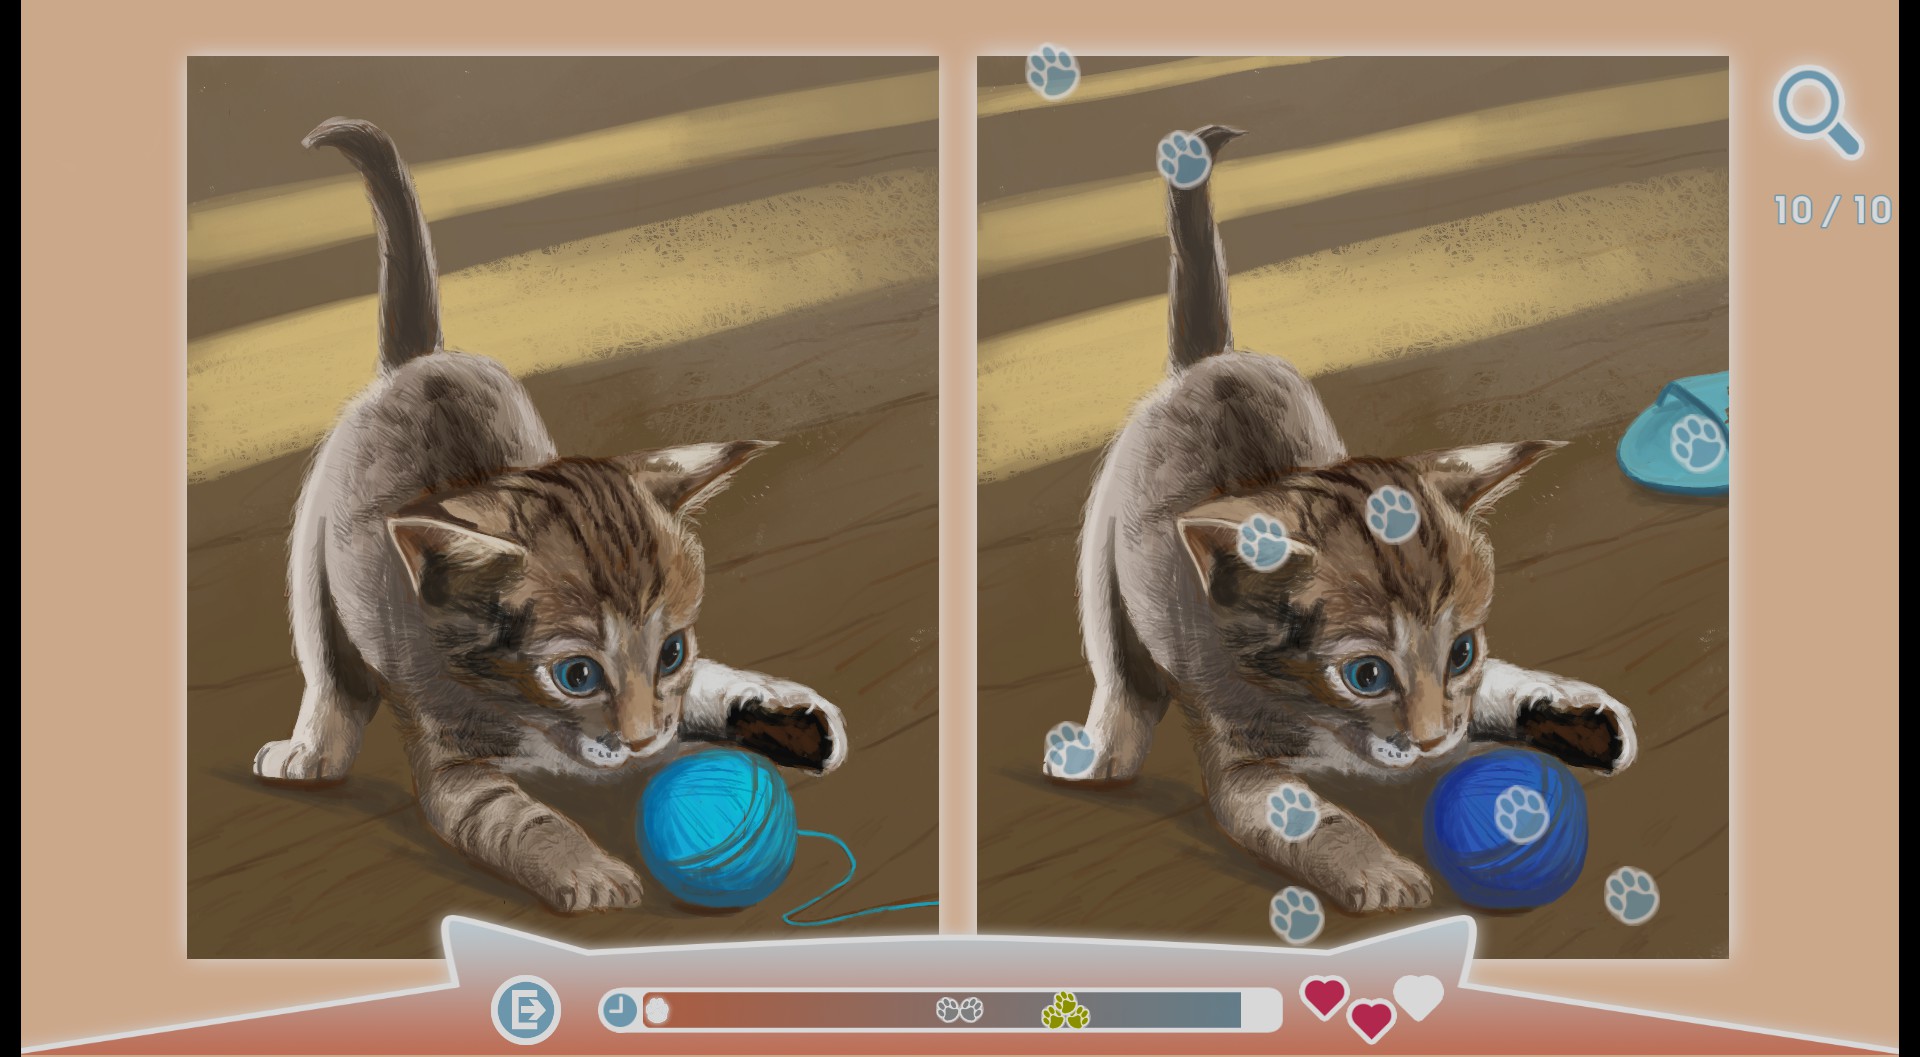 Cute Cats All Achievements Guide Completed! - Levels - 442B4D7